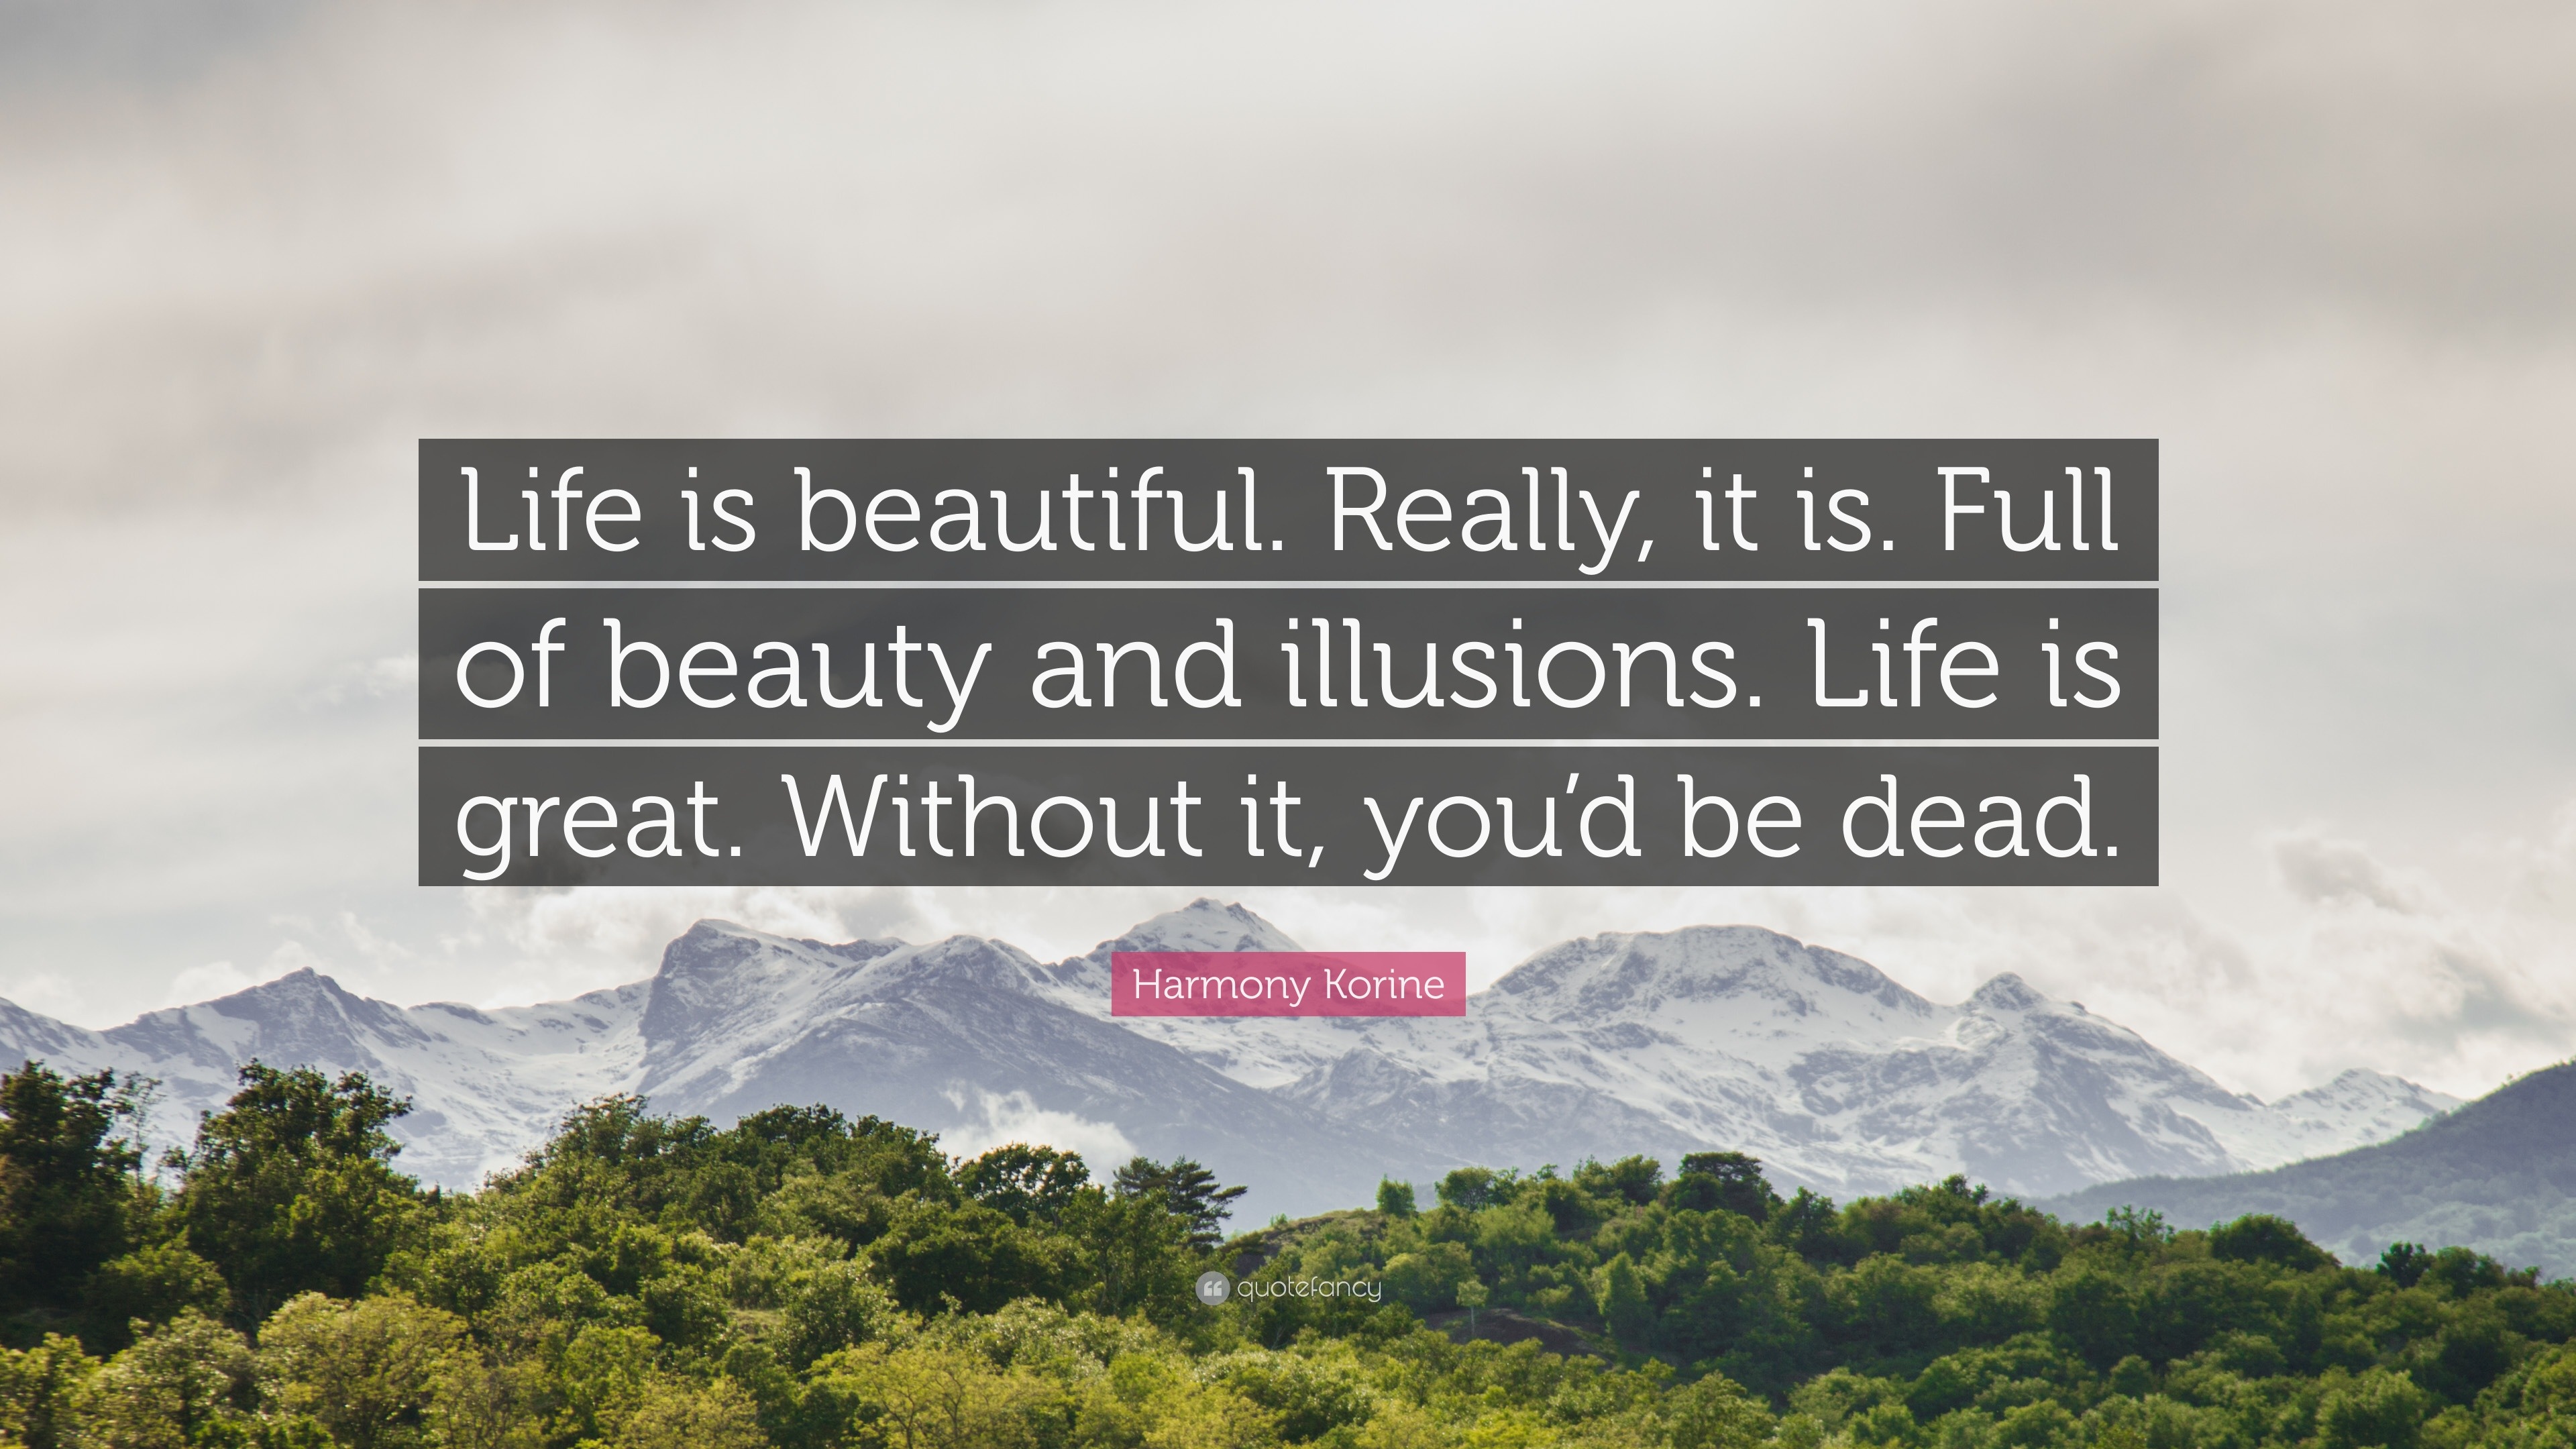 Harmony Korine Quote “Life is beautiful Really it is Full of